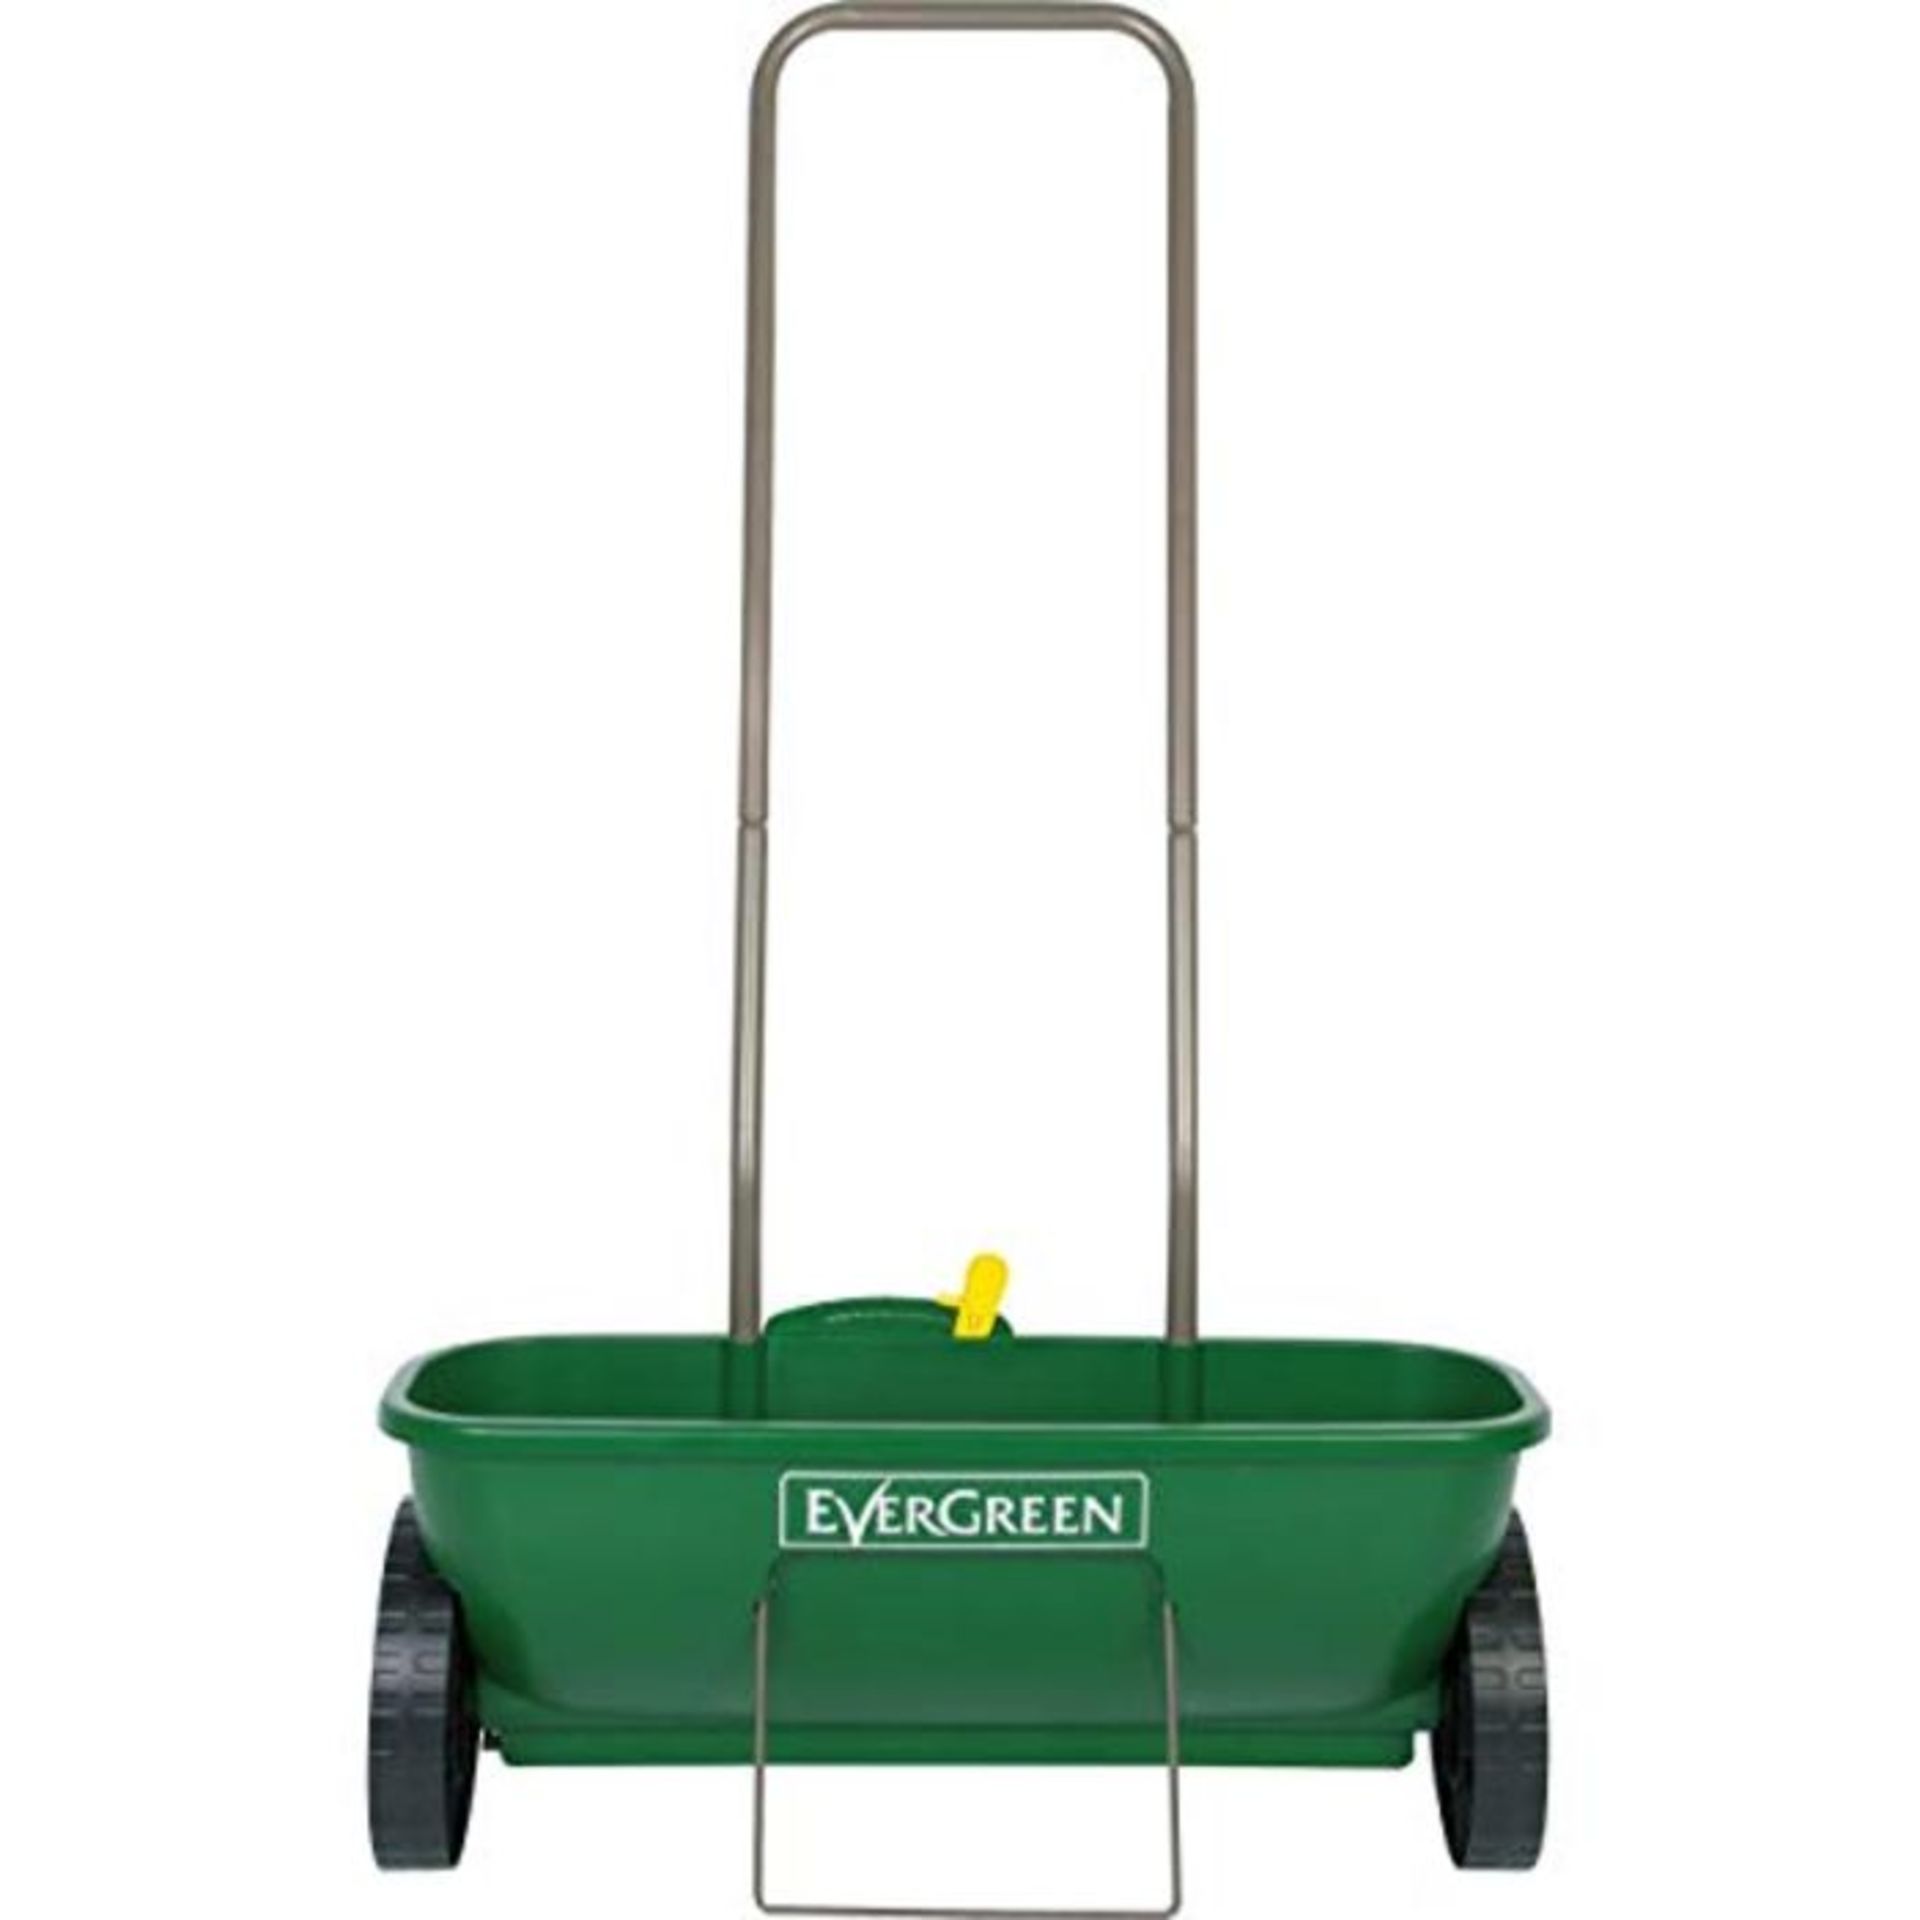 [CRACKED] EverGreen 18920 Easy Spreader Plus, 620.0 mm*240.0 mm*300.0 mm - Image 4 of 6